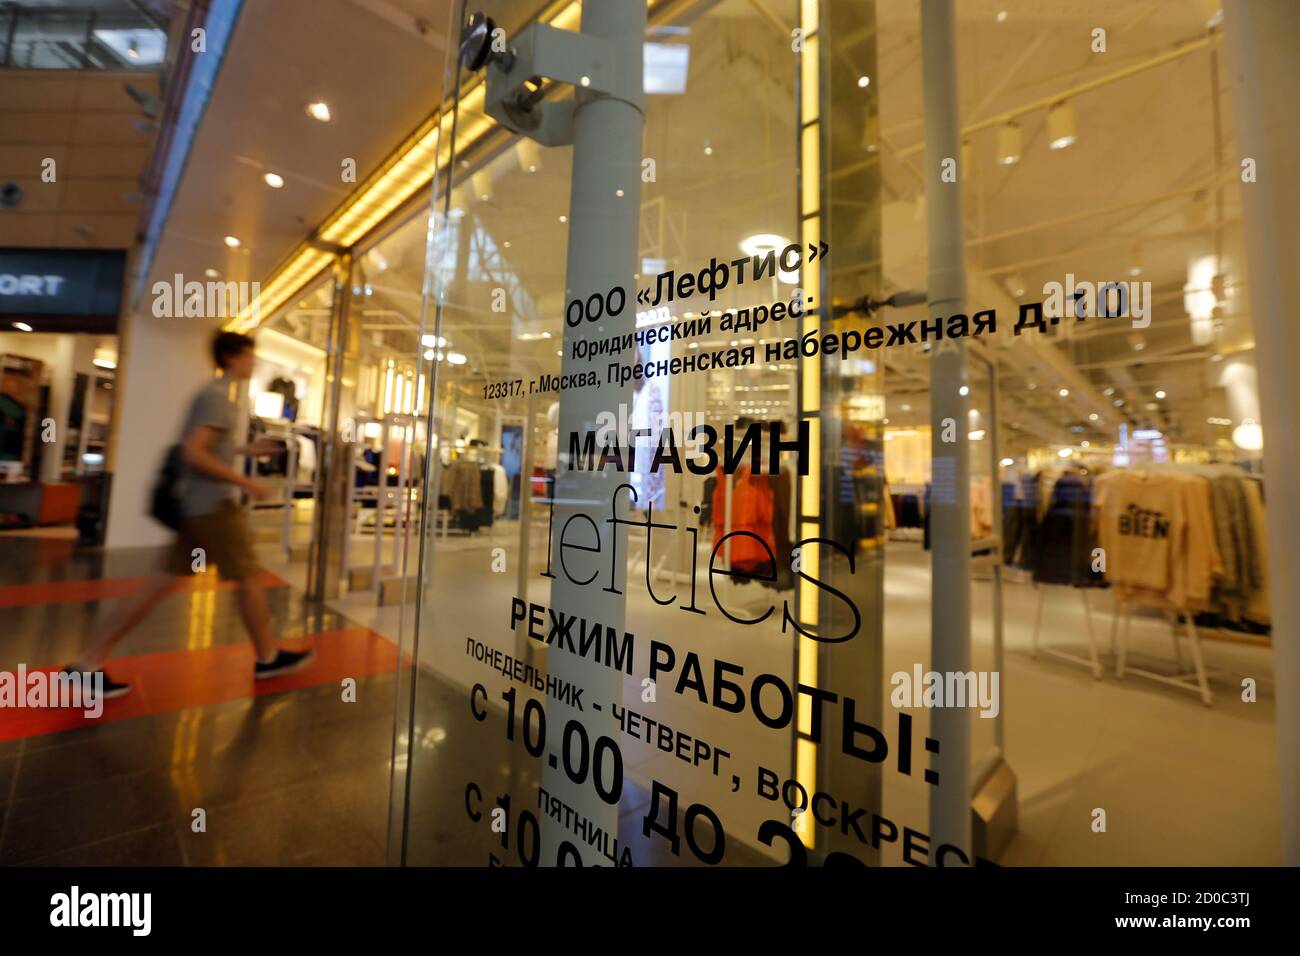 A customer enters a Lefties store in Moscow August 12, 2014. Inditex, owner  of global fashion chain Zara, has taken its revamped low-cost brand Lefties  to Russia in its latest move to